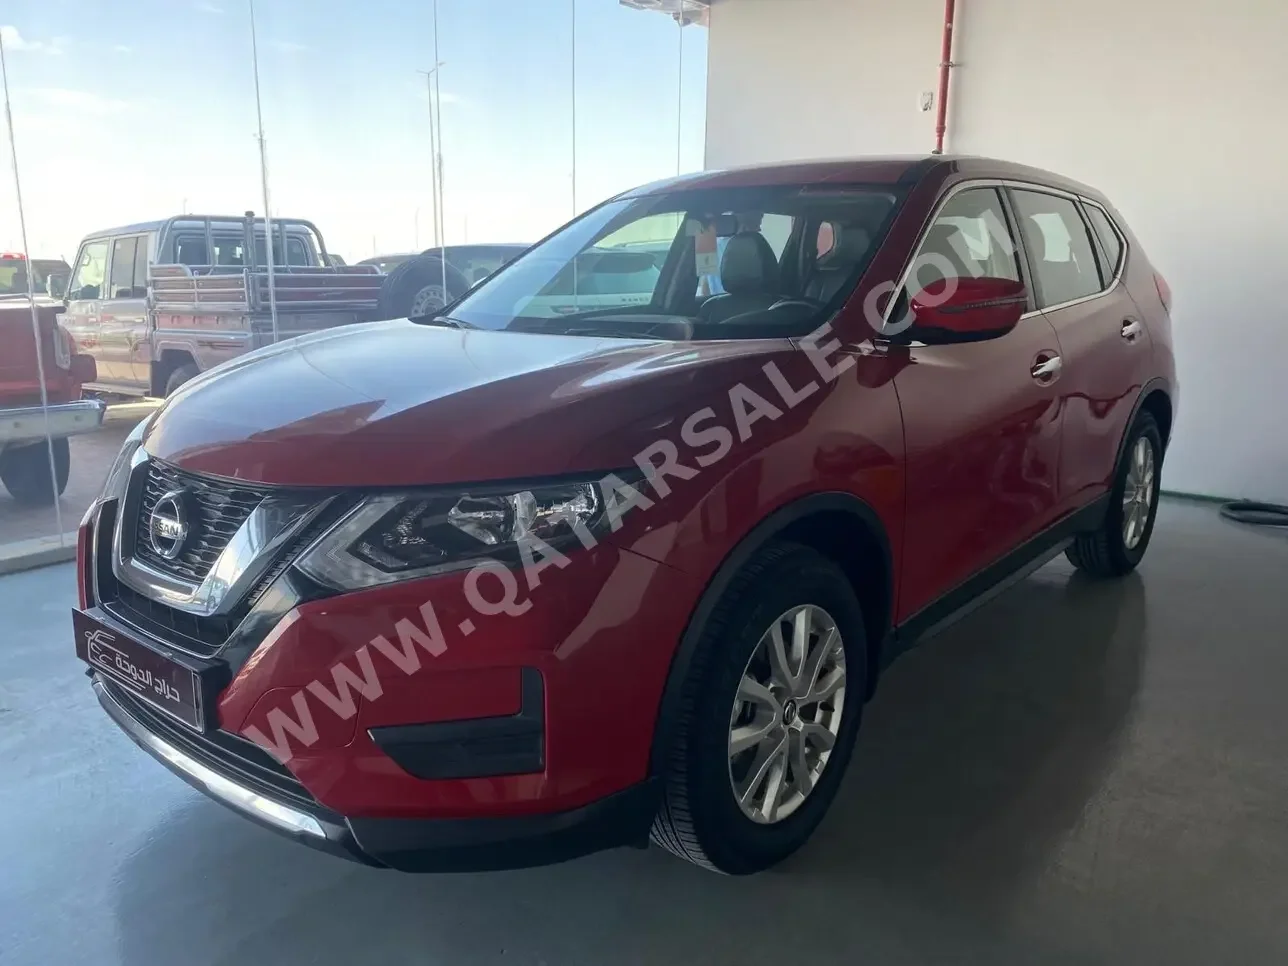 Nissan  X-Trail  2021  Automatic  109,000 Km  4 Cylinder  Four Wheel Drive (4WD)  SUV  Red